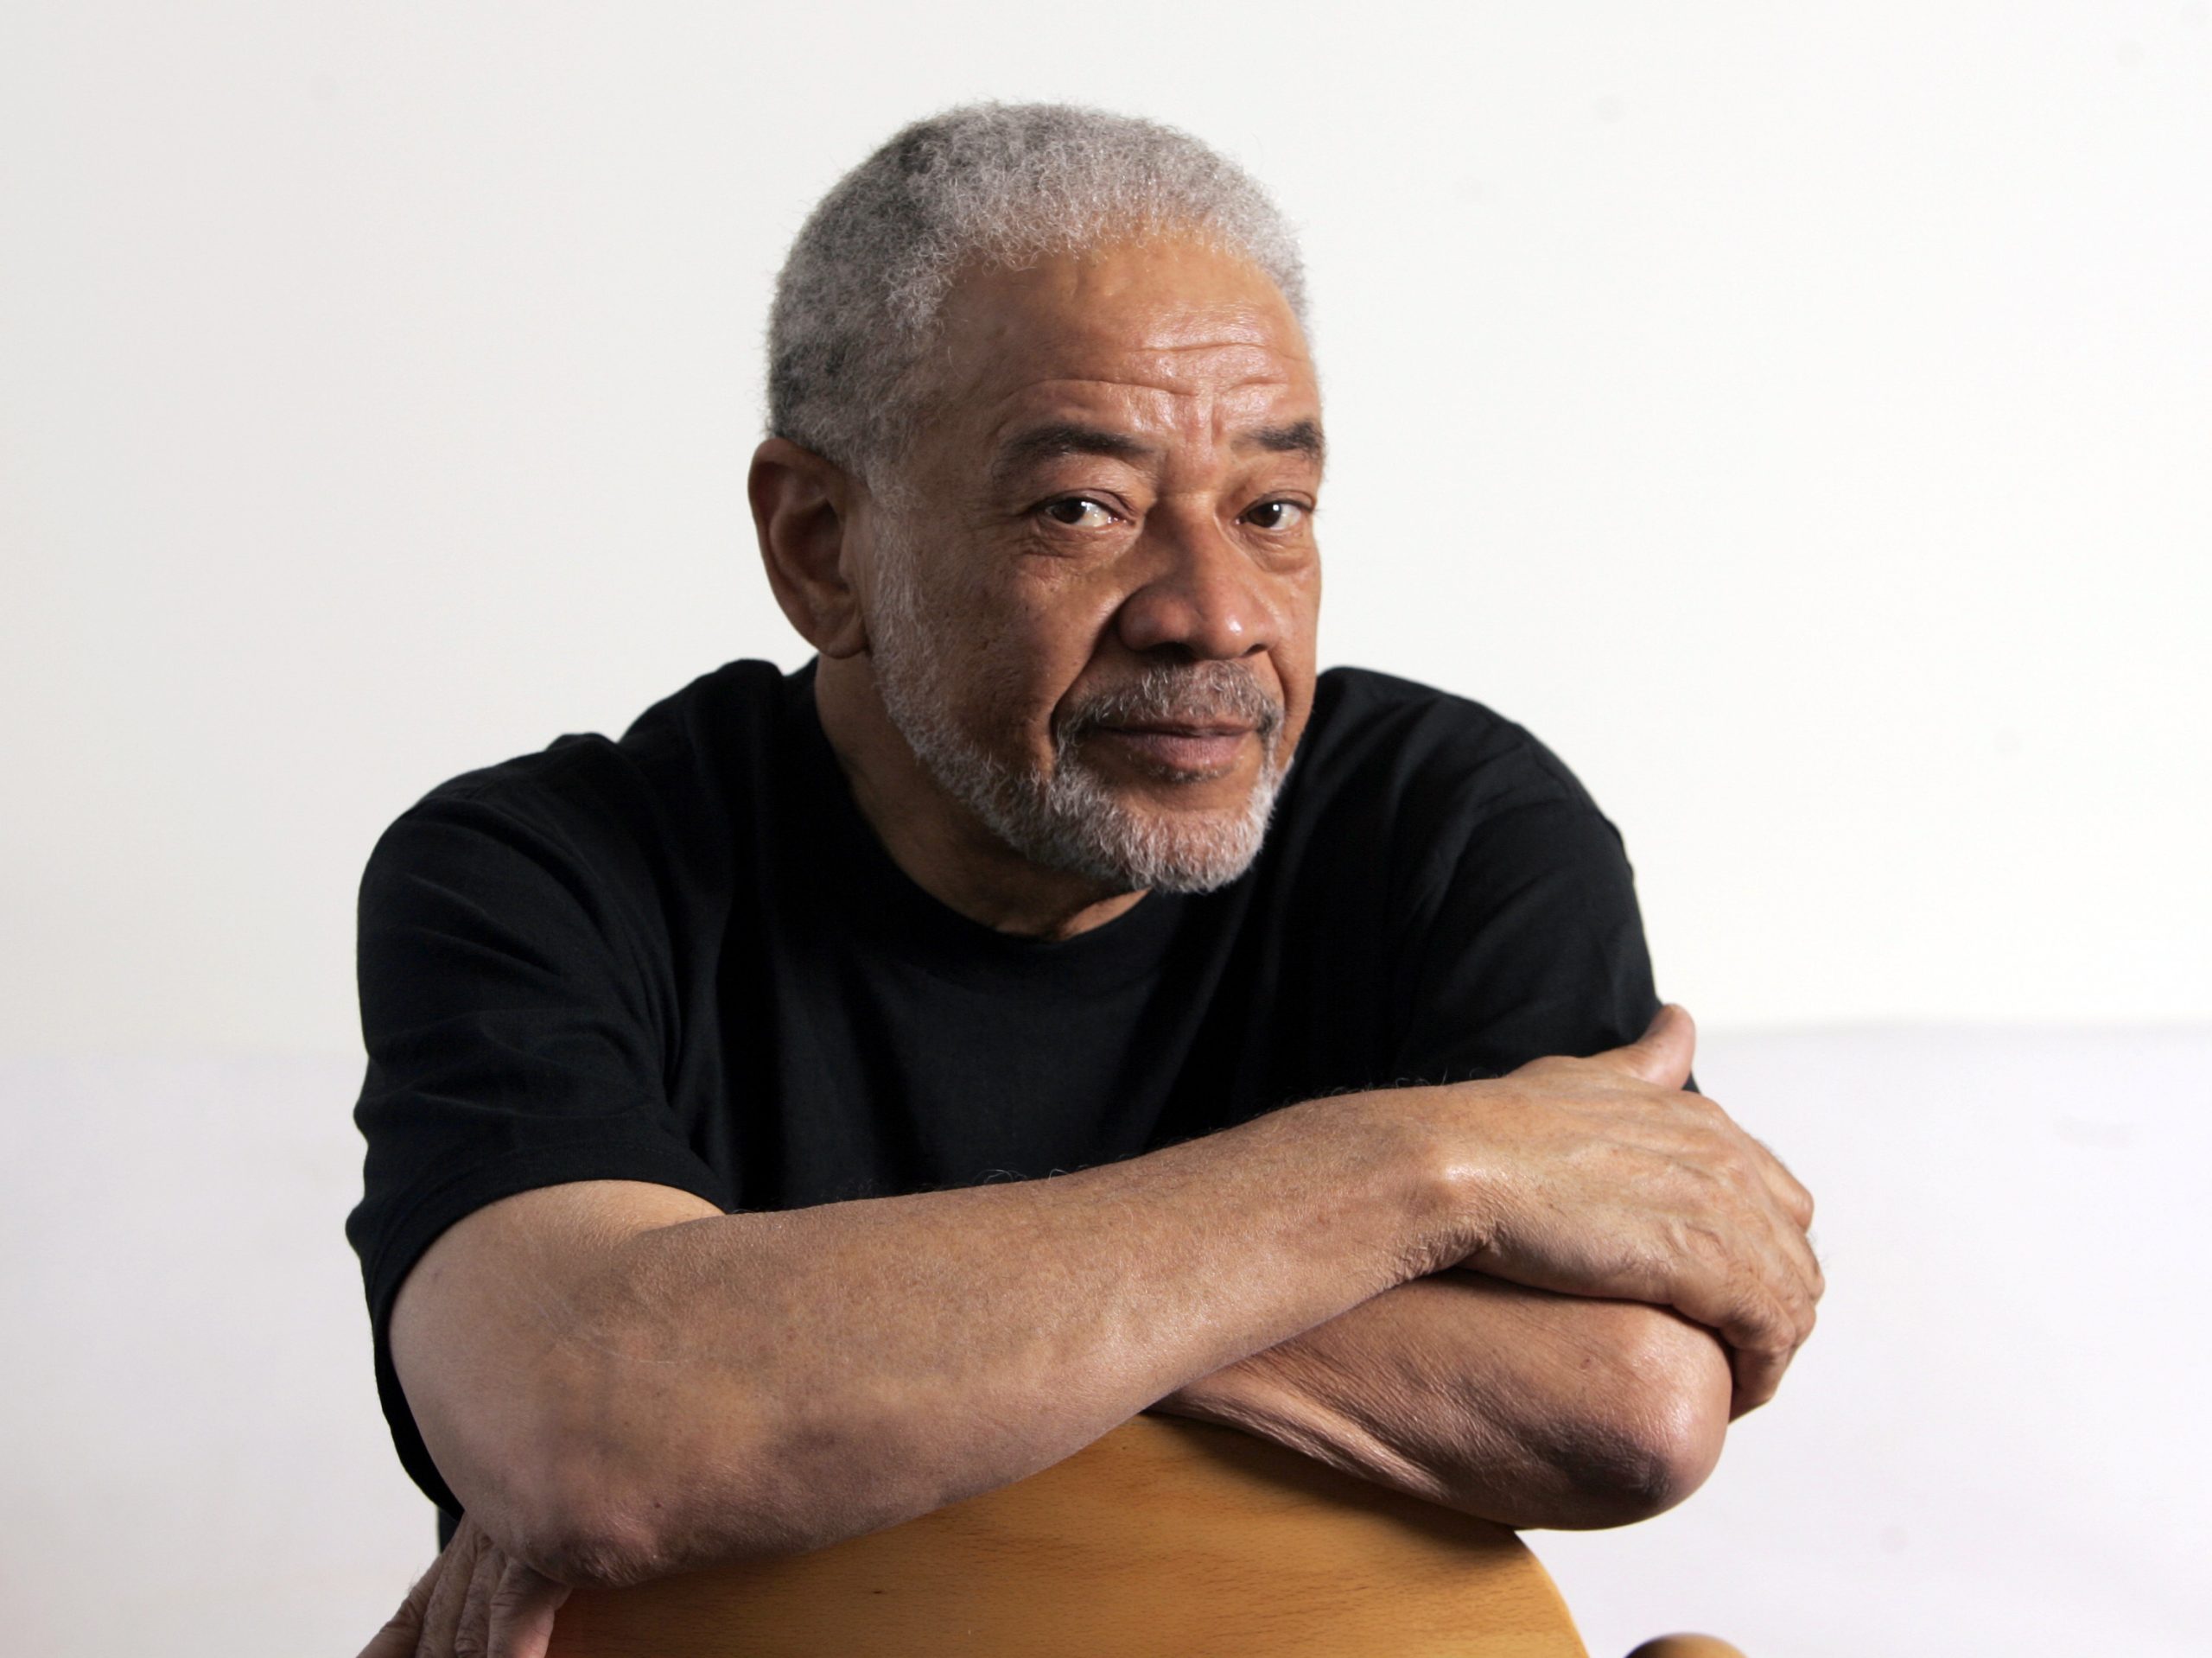 Beyond 'Ain't No Sunshine' And 'Lean On Me': On Bill Withers' Musical Legacy : NPR